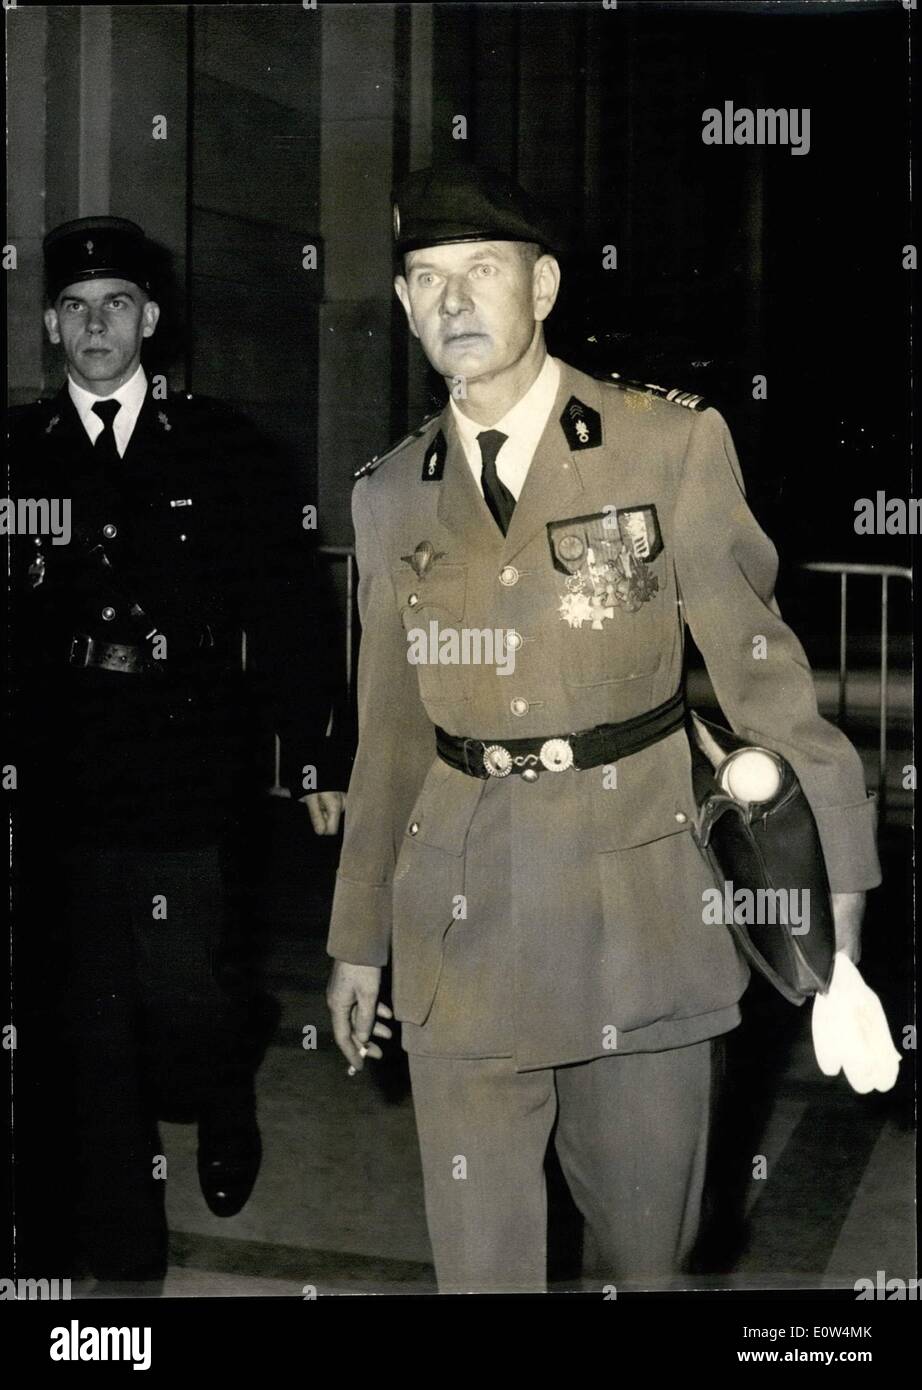 Jun. 06, 1961 - Major involved in Algerian Insurrection appears before Military Tribunal: Commandant de Saint- Marc who Commanded the first Regiment of foreign paratroops during the Insurrection in Algeria appeared for trial before the Military tribunal today. This trial comes as a sequence of the trial od Generals Challe and Zeller. Photo shows Commandant de Saint - Marc (who was not stripped of his rank) arriving at the Law Courts today. Stock Photo